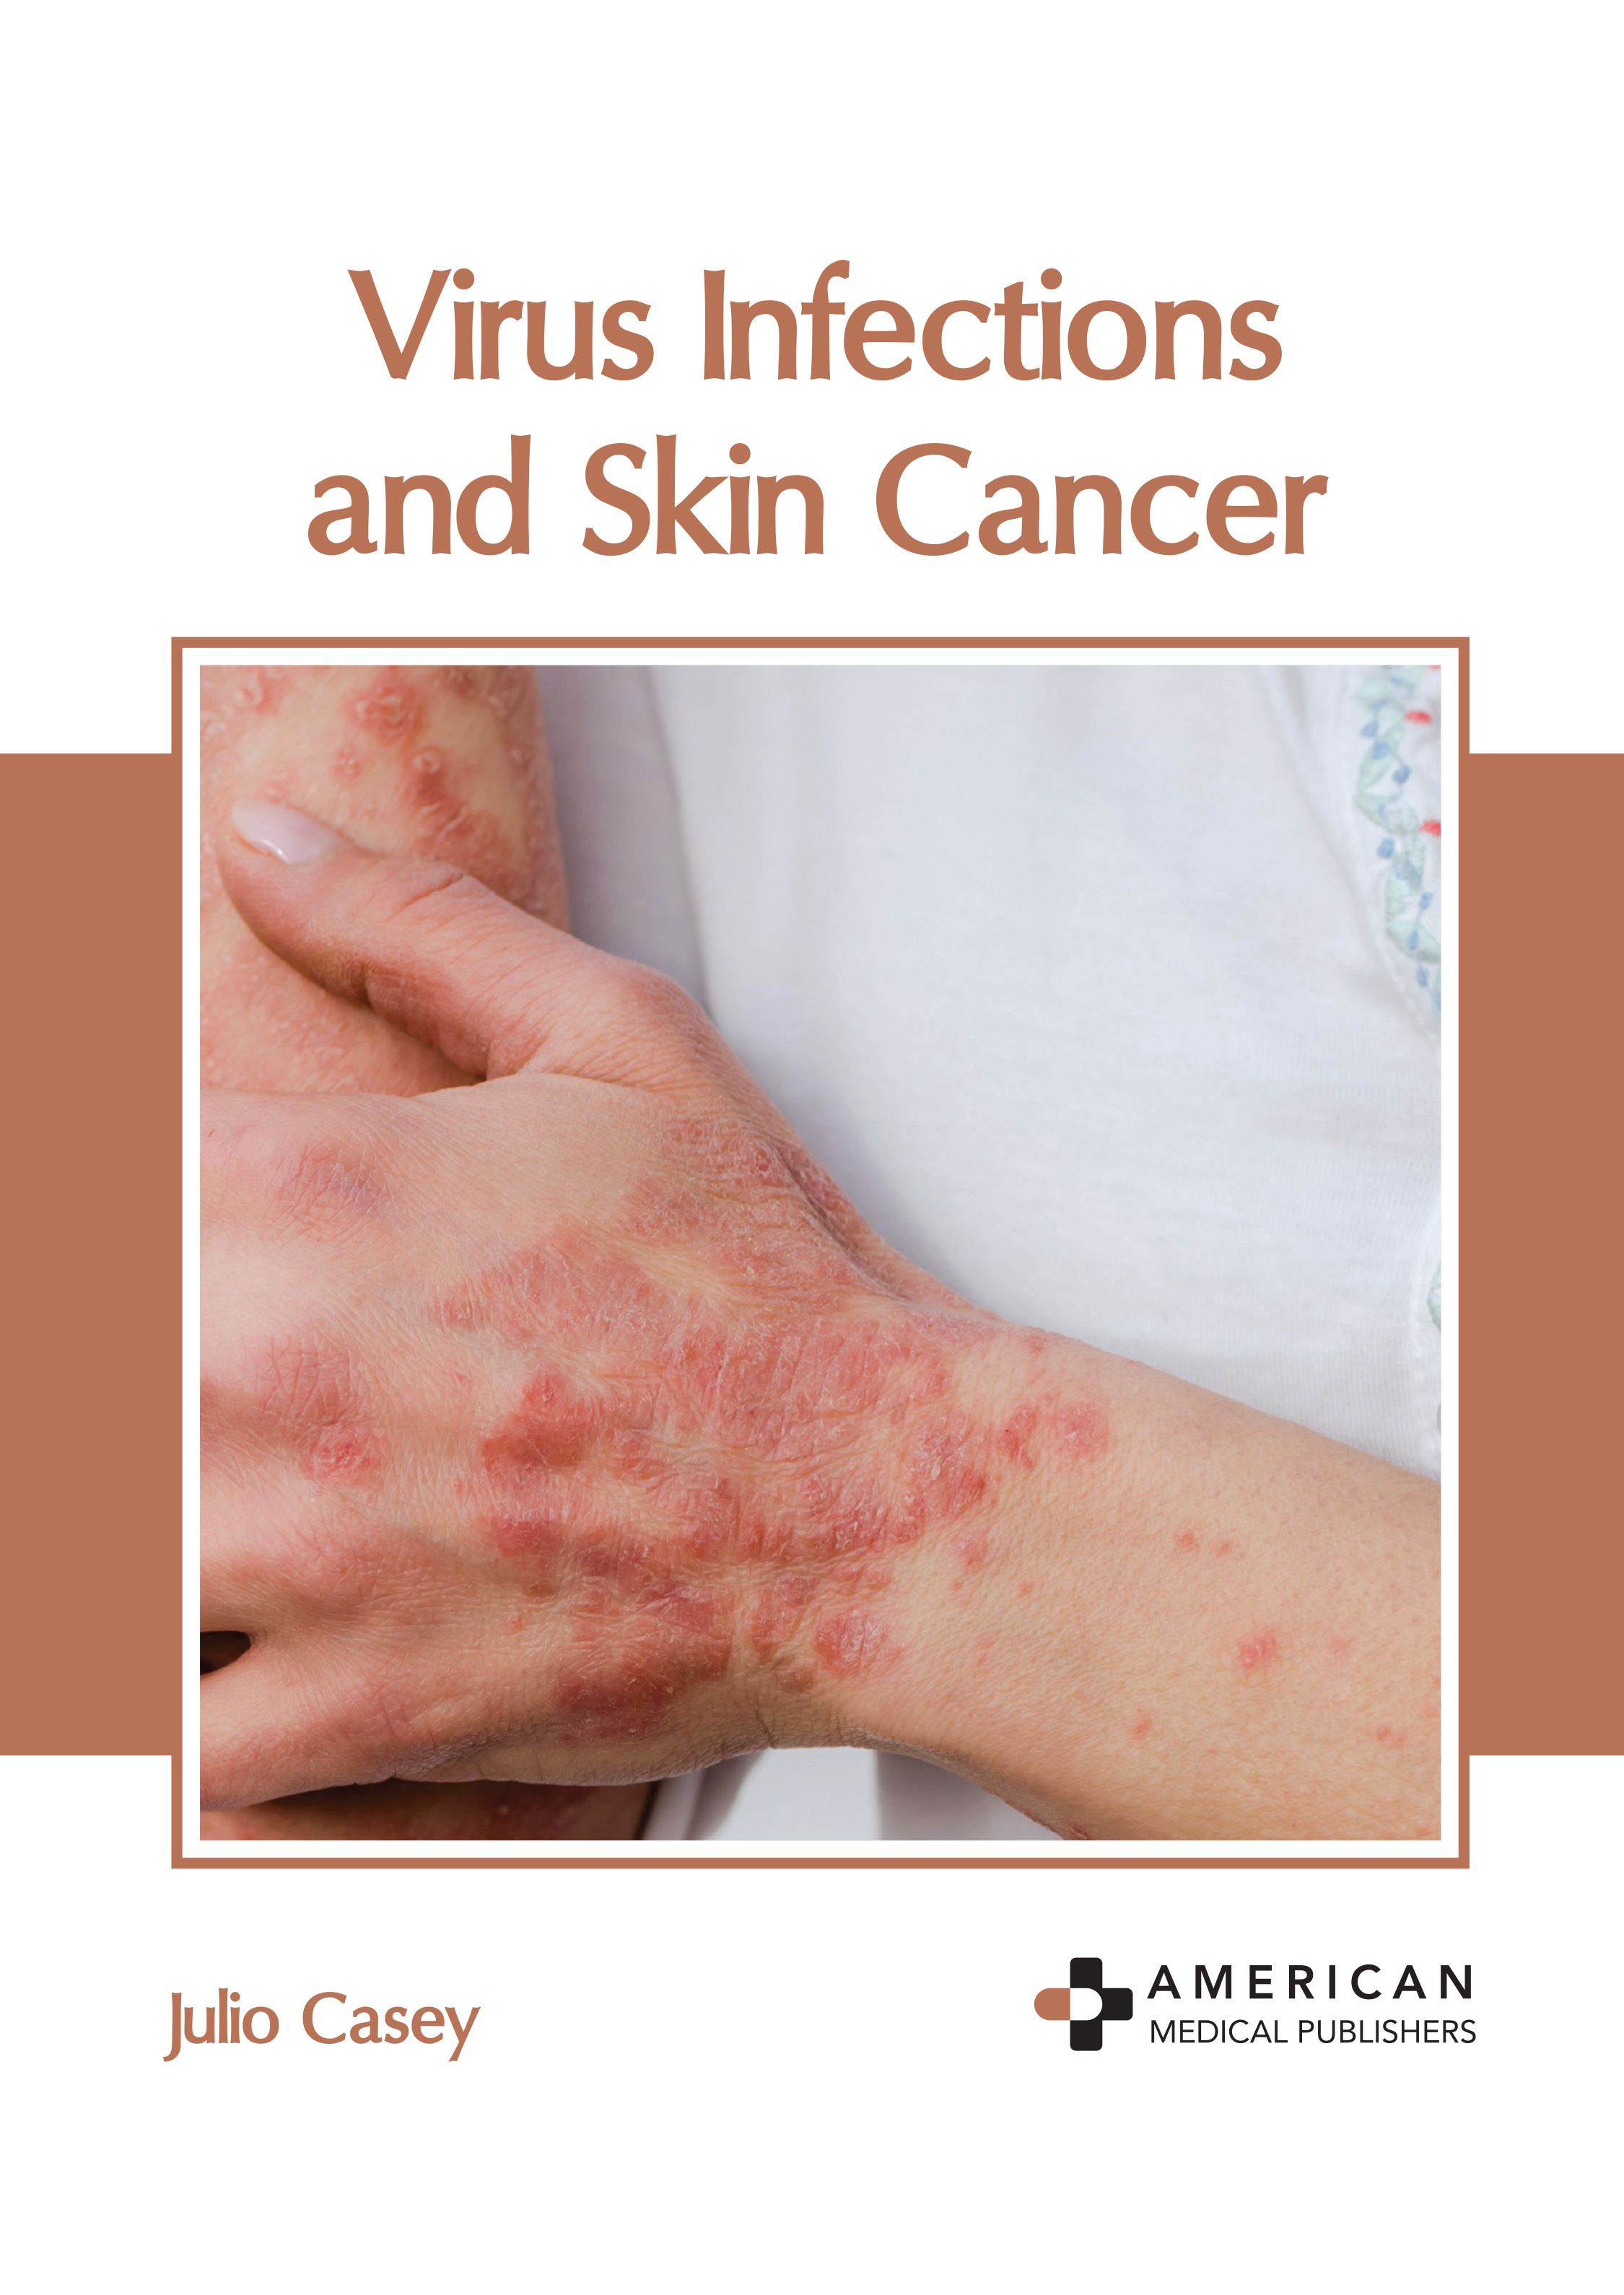 VIRUS INFECTIONS AND SKIN CANCER